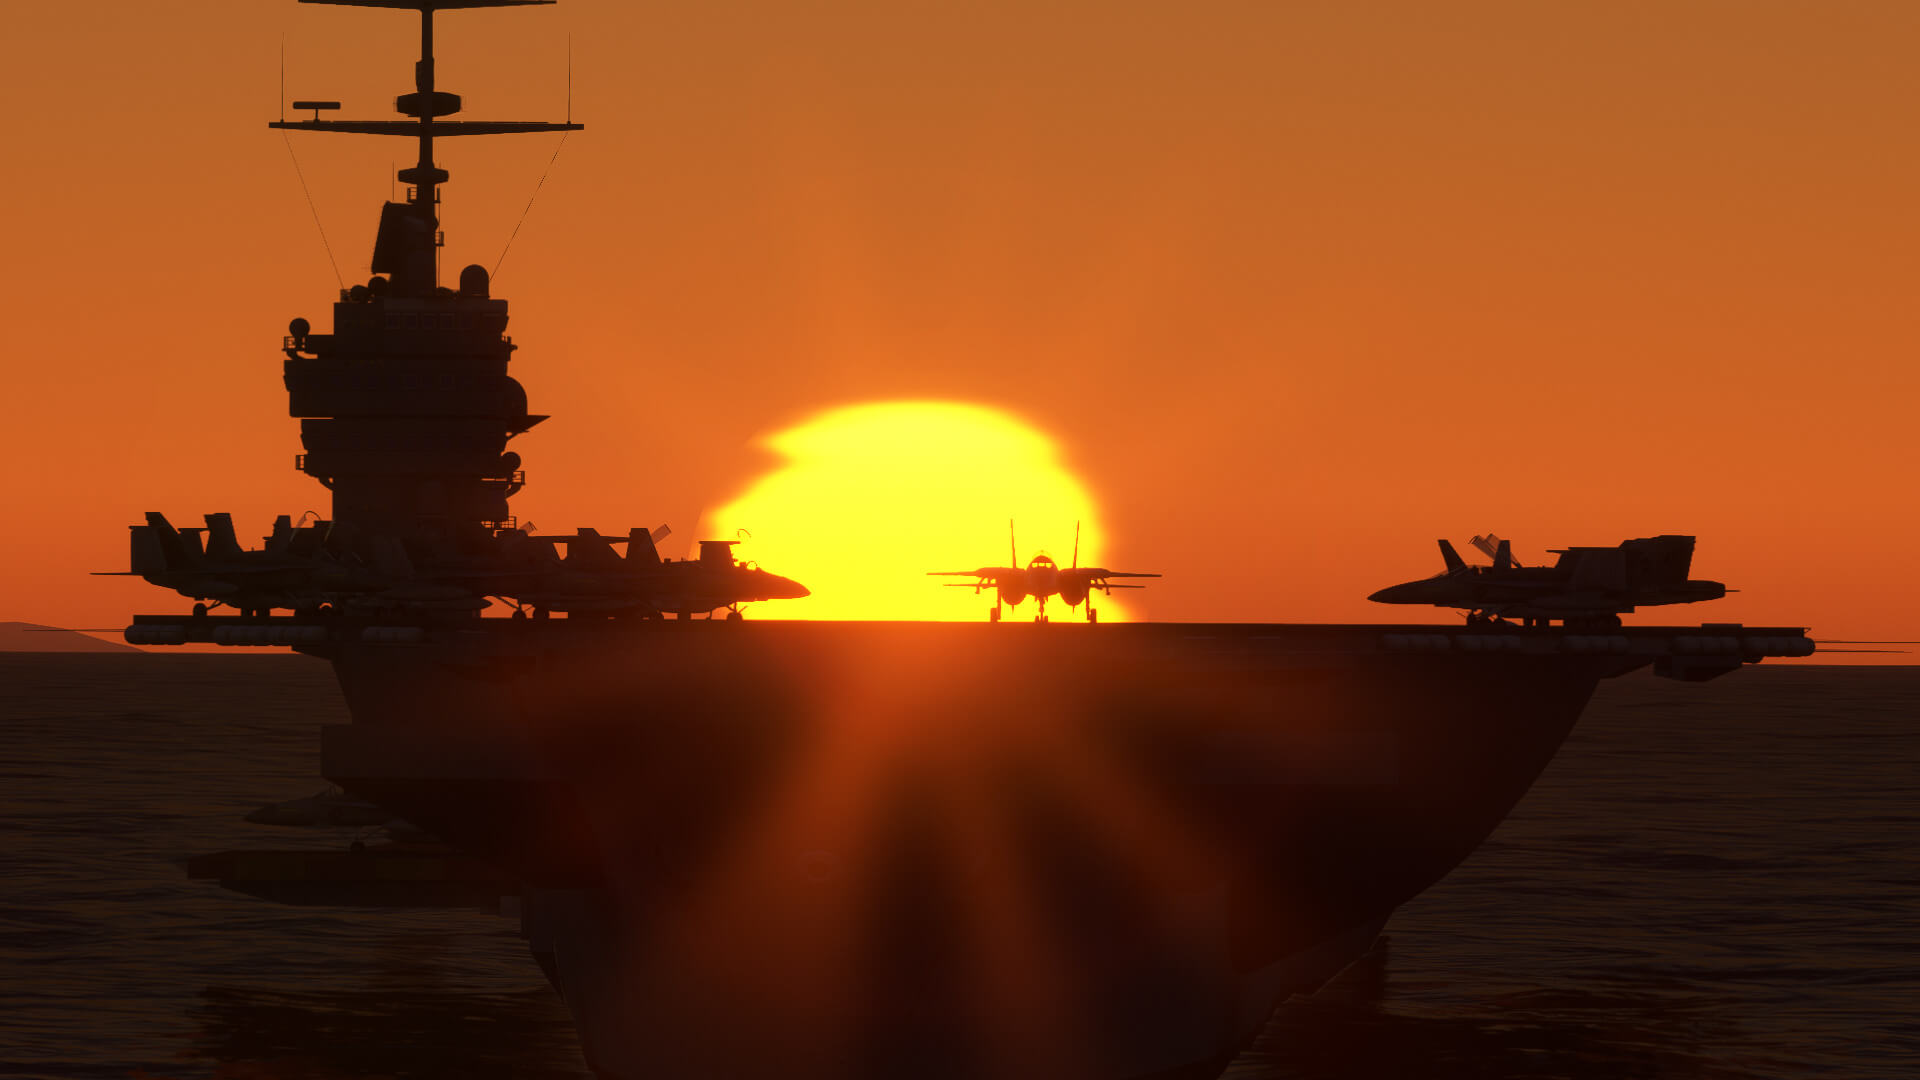 Several jets are silhouetted on an aircraft carrier by the setting sun.